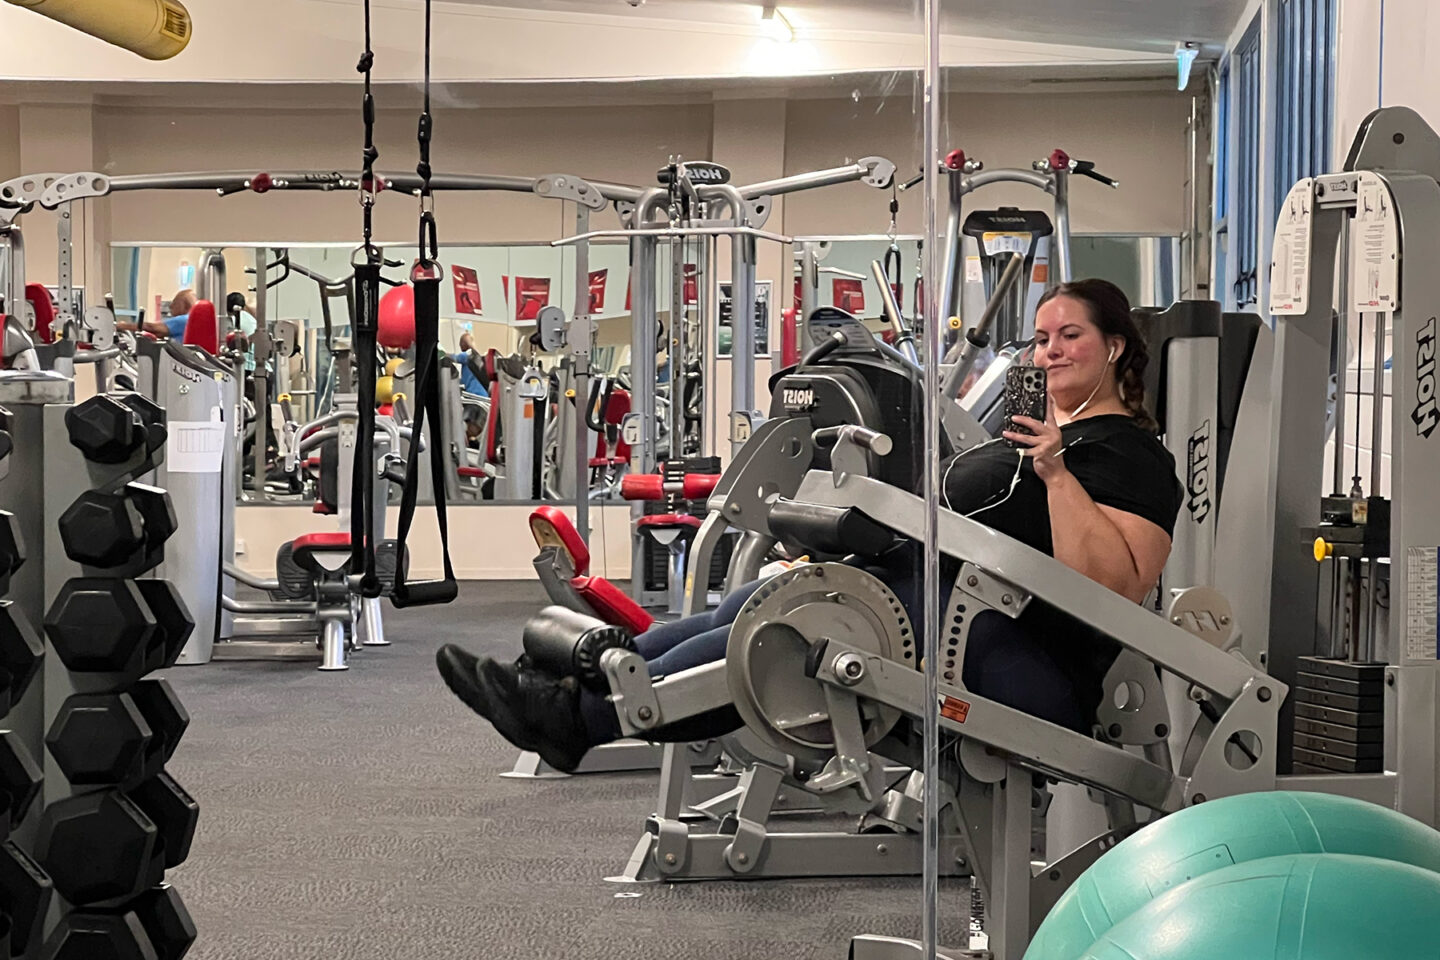 A fat Māori woman with lipoedema is sitting on a leg curl and extension machine in an empty gym. She is taking a selfie in a mirror.